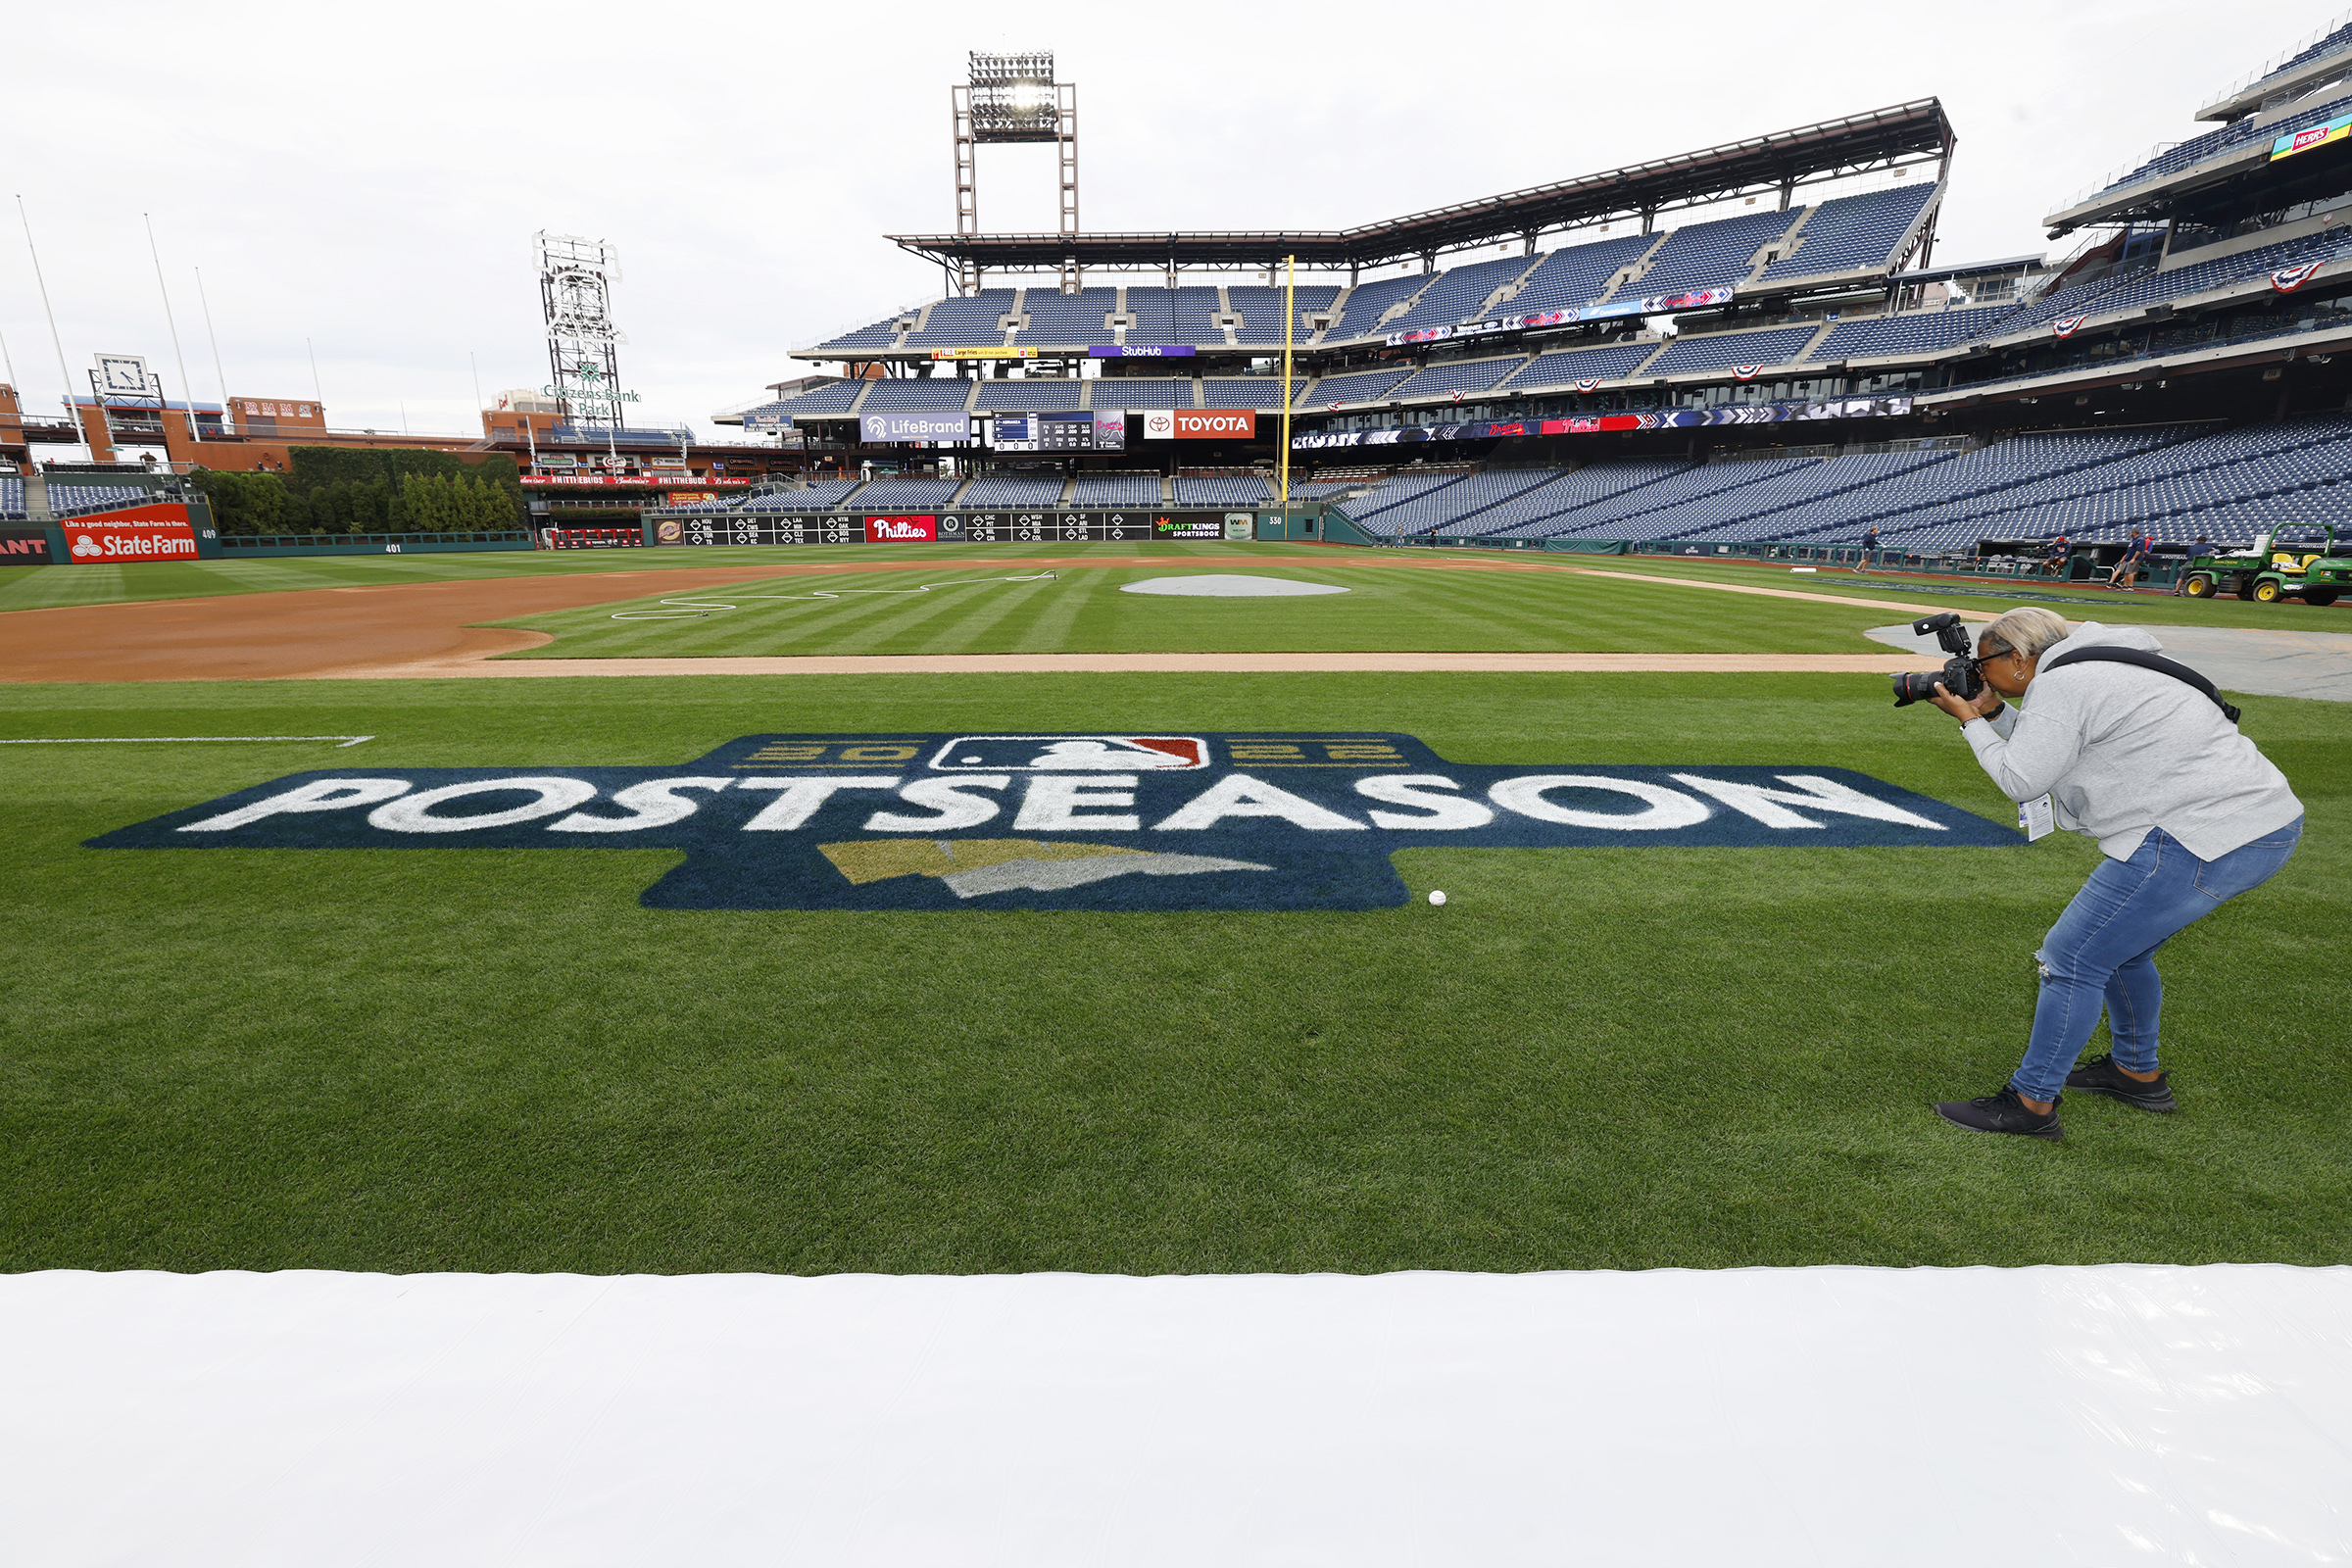 Phillies-Braves weather forecast in Philadelphia may favor pitchers at  Citizens Bank Park